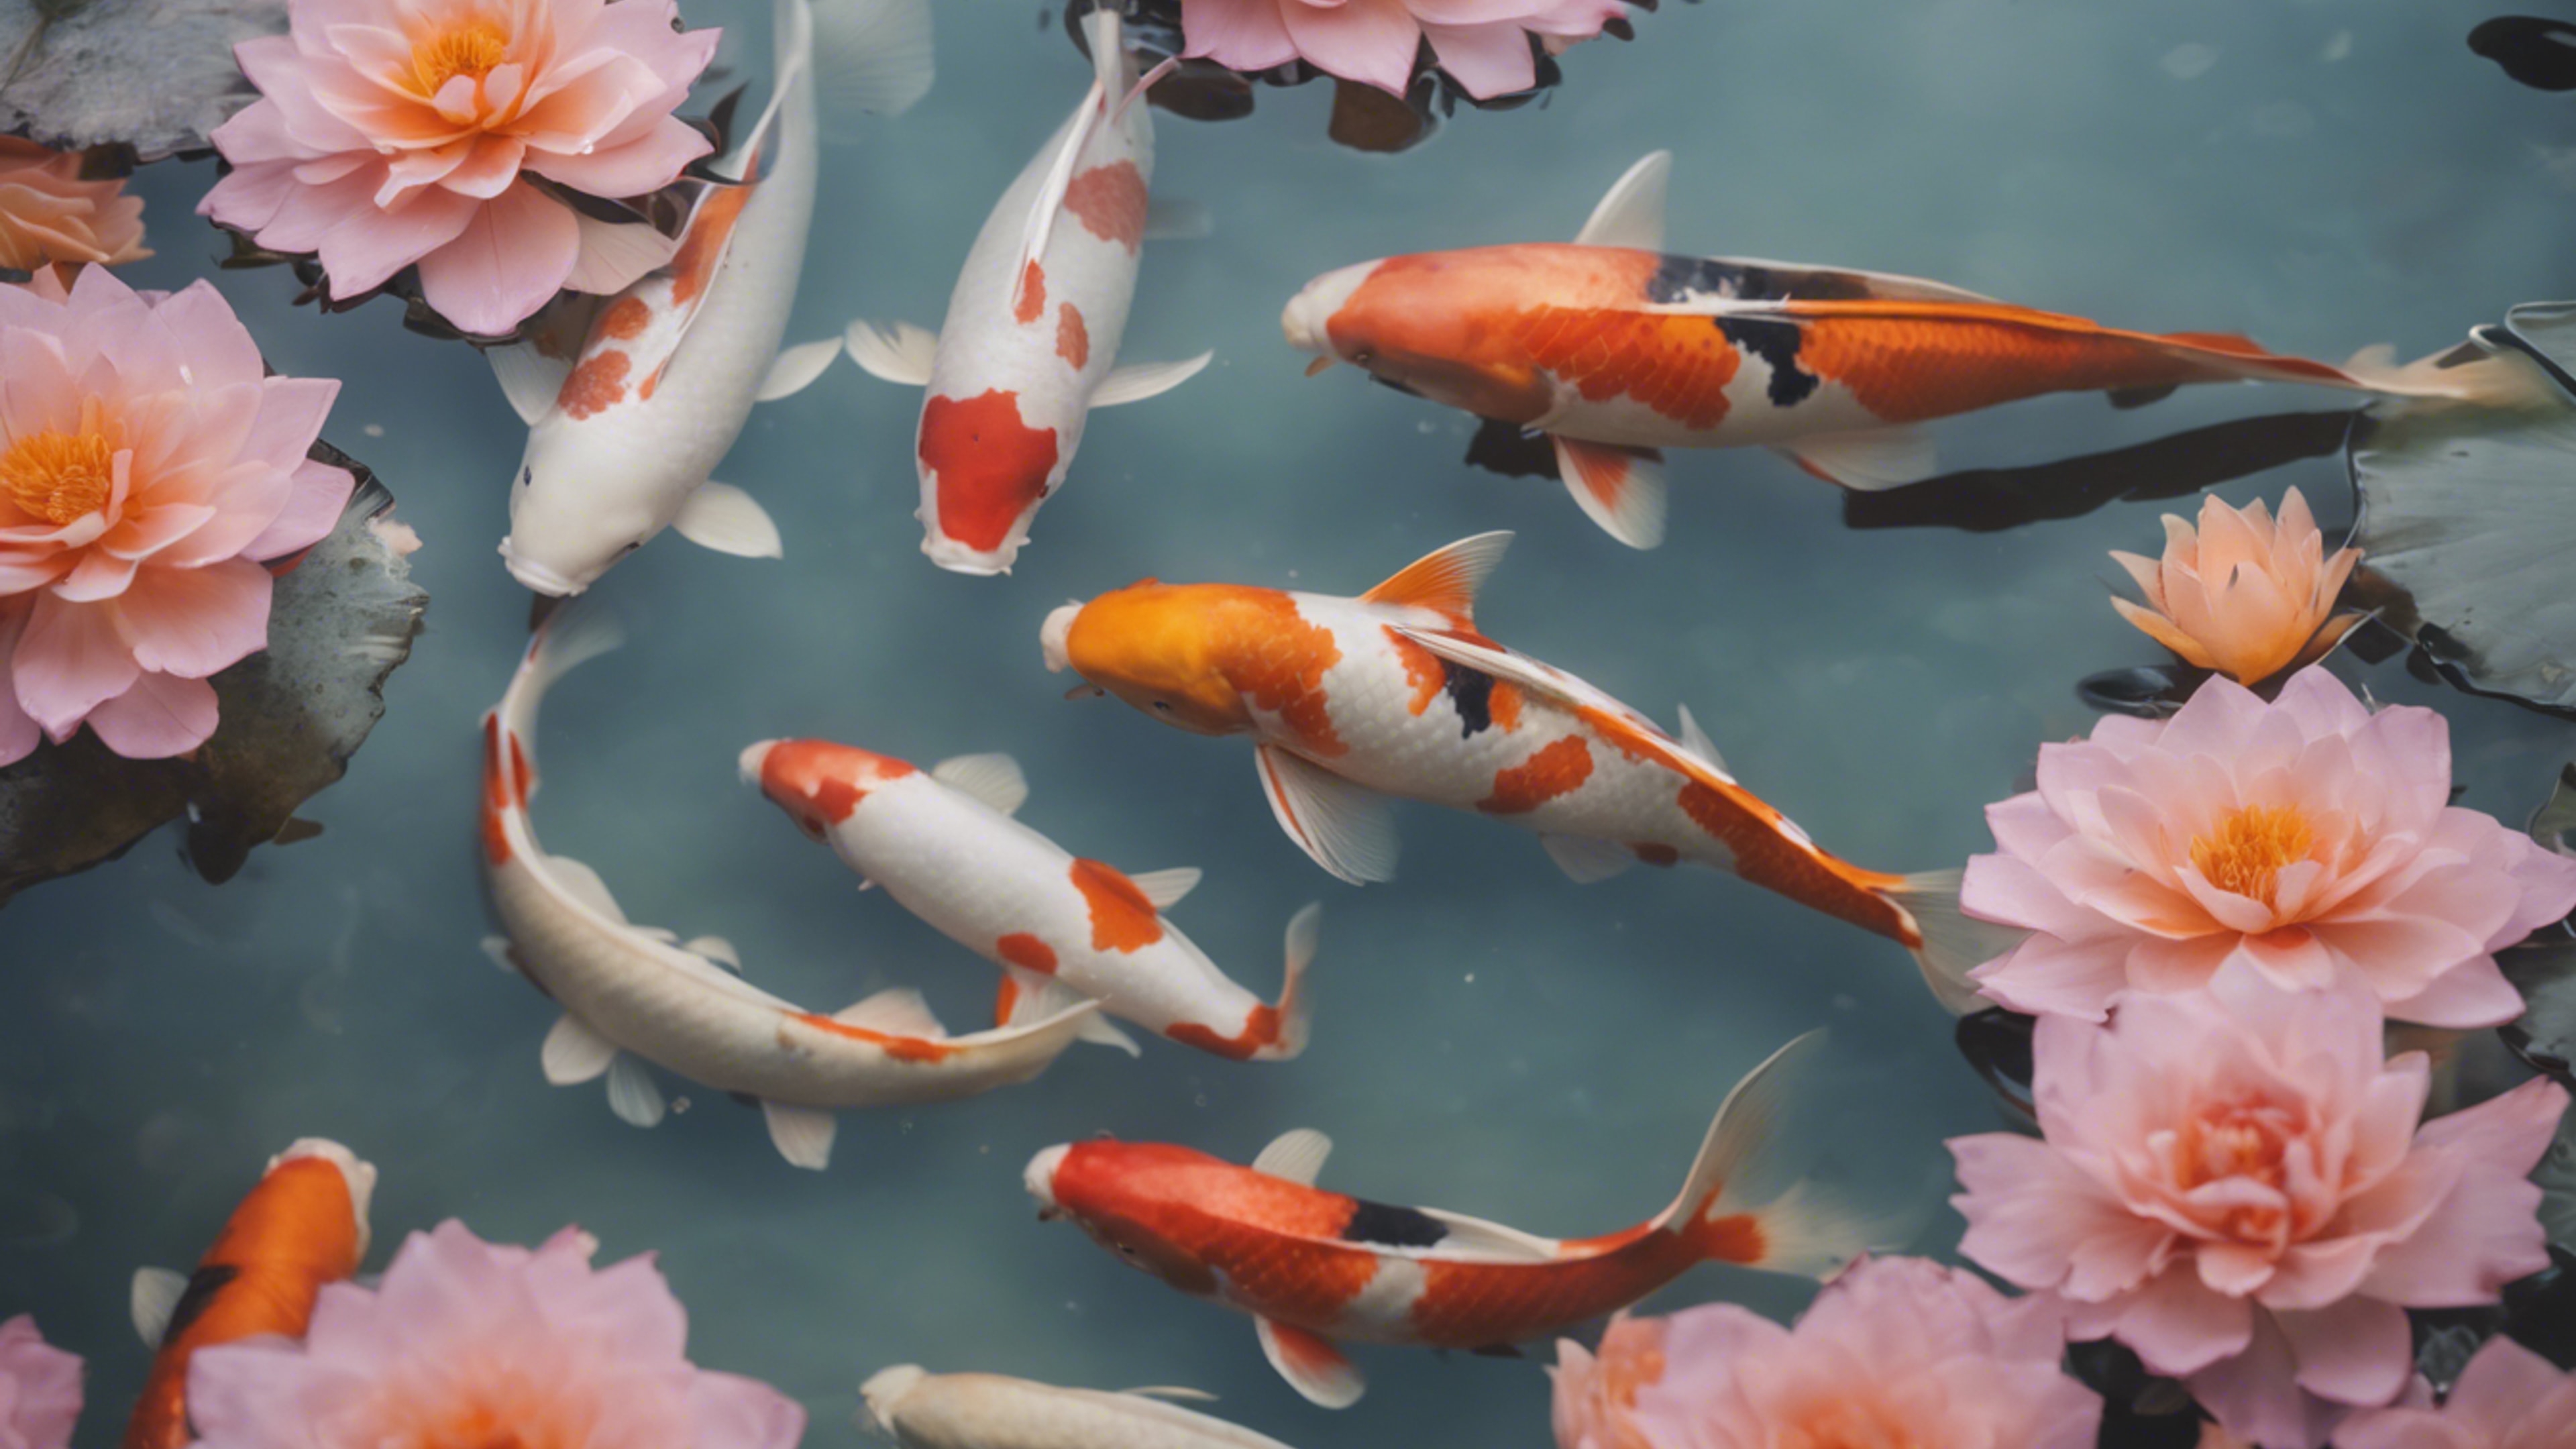 A garden scene featuring tranquil koi fishes in a cool pastel color pond. ورق الجدران[188bf594936145059e7f]